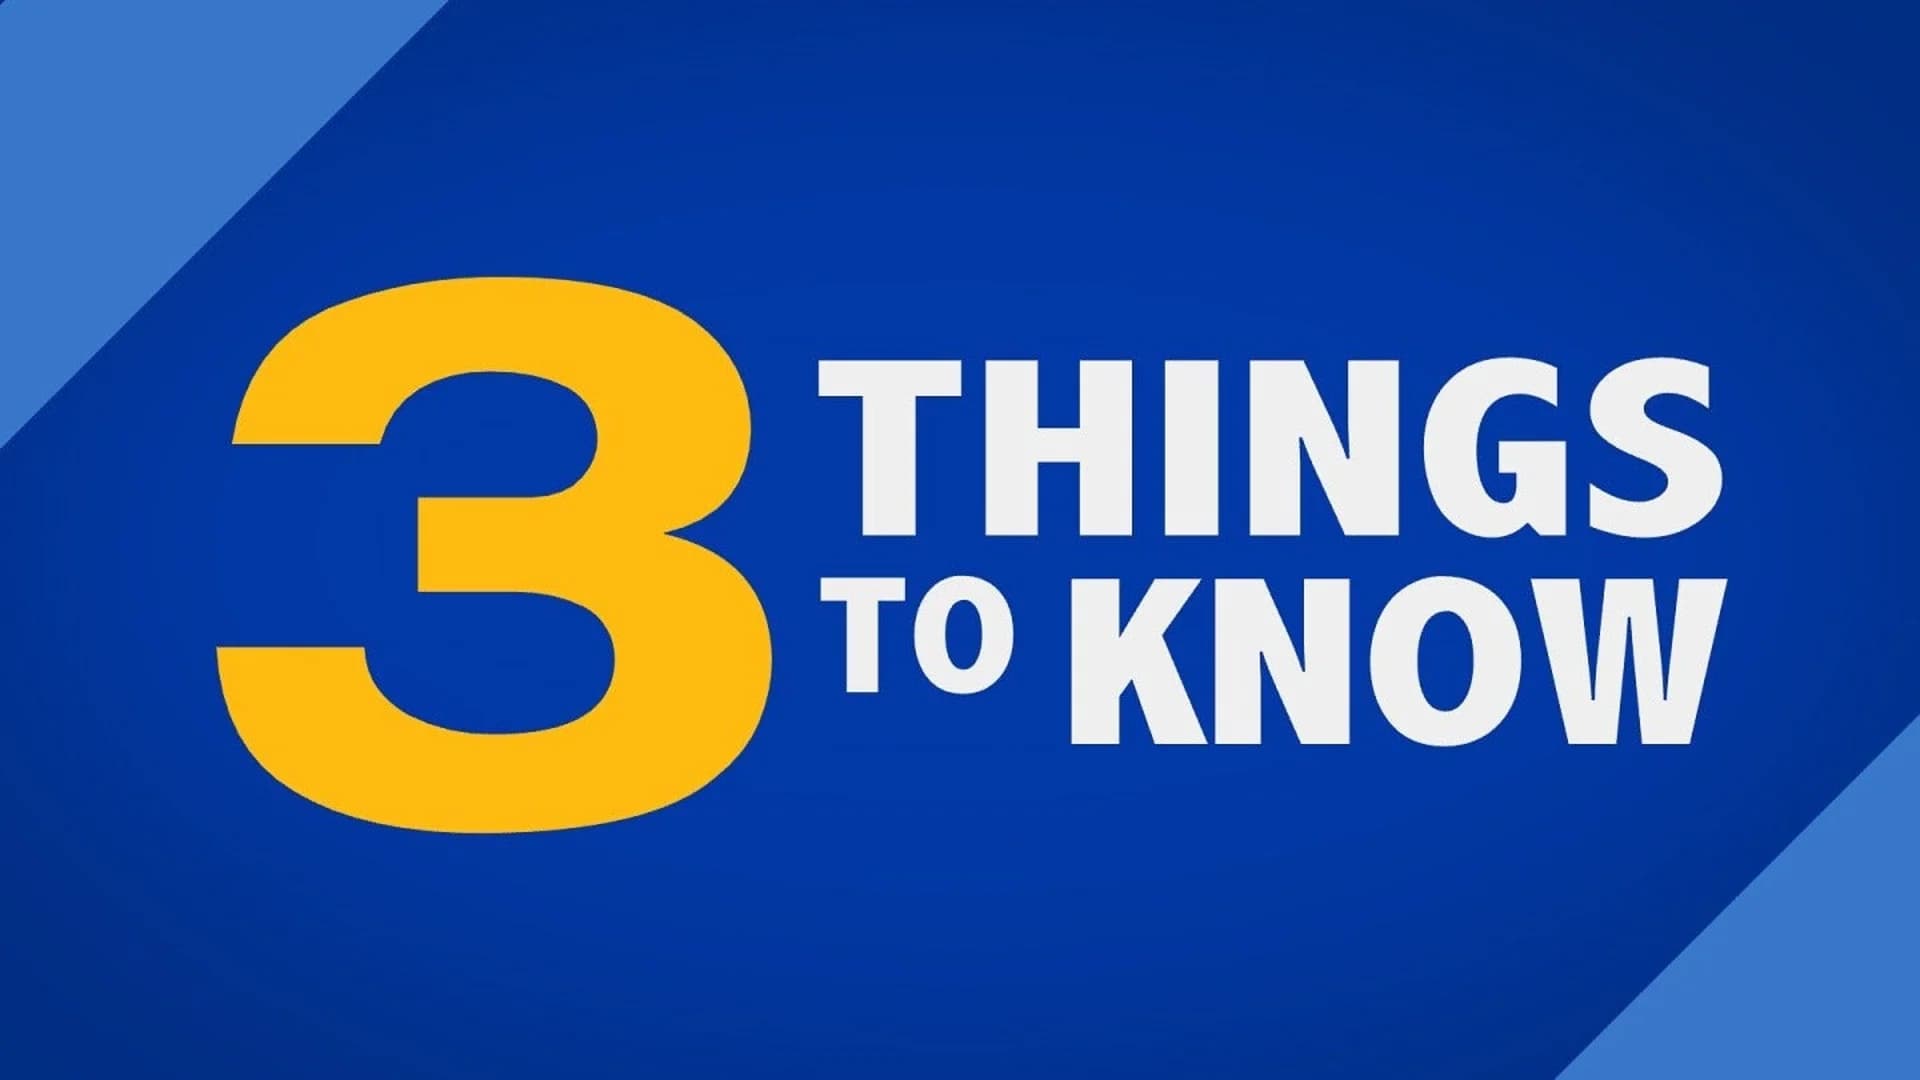 3 Things to Know – July 31, 2018